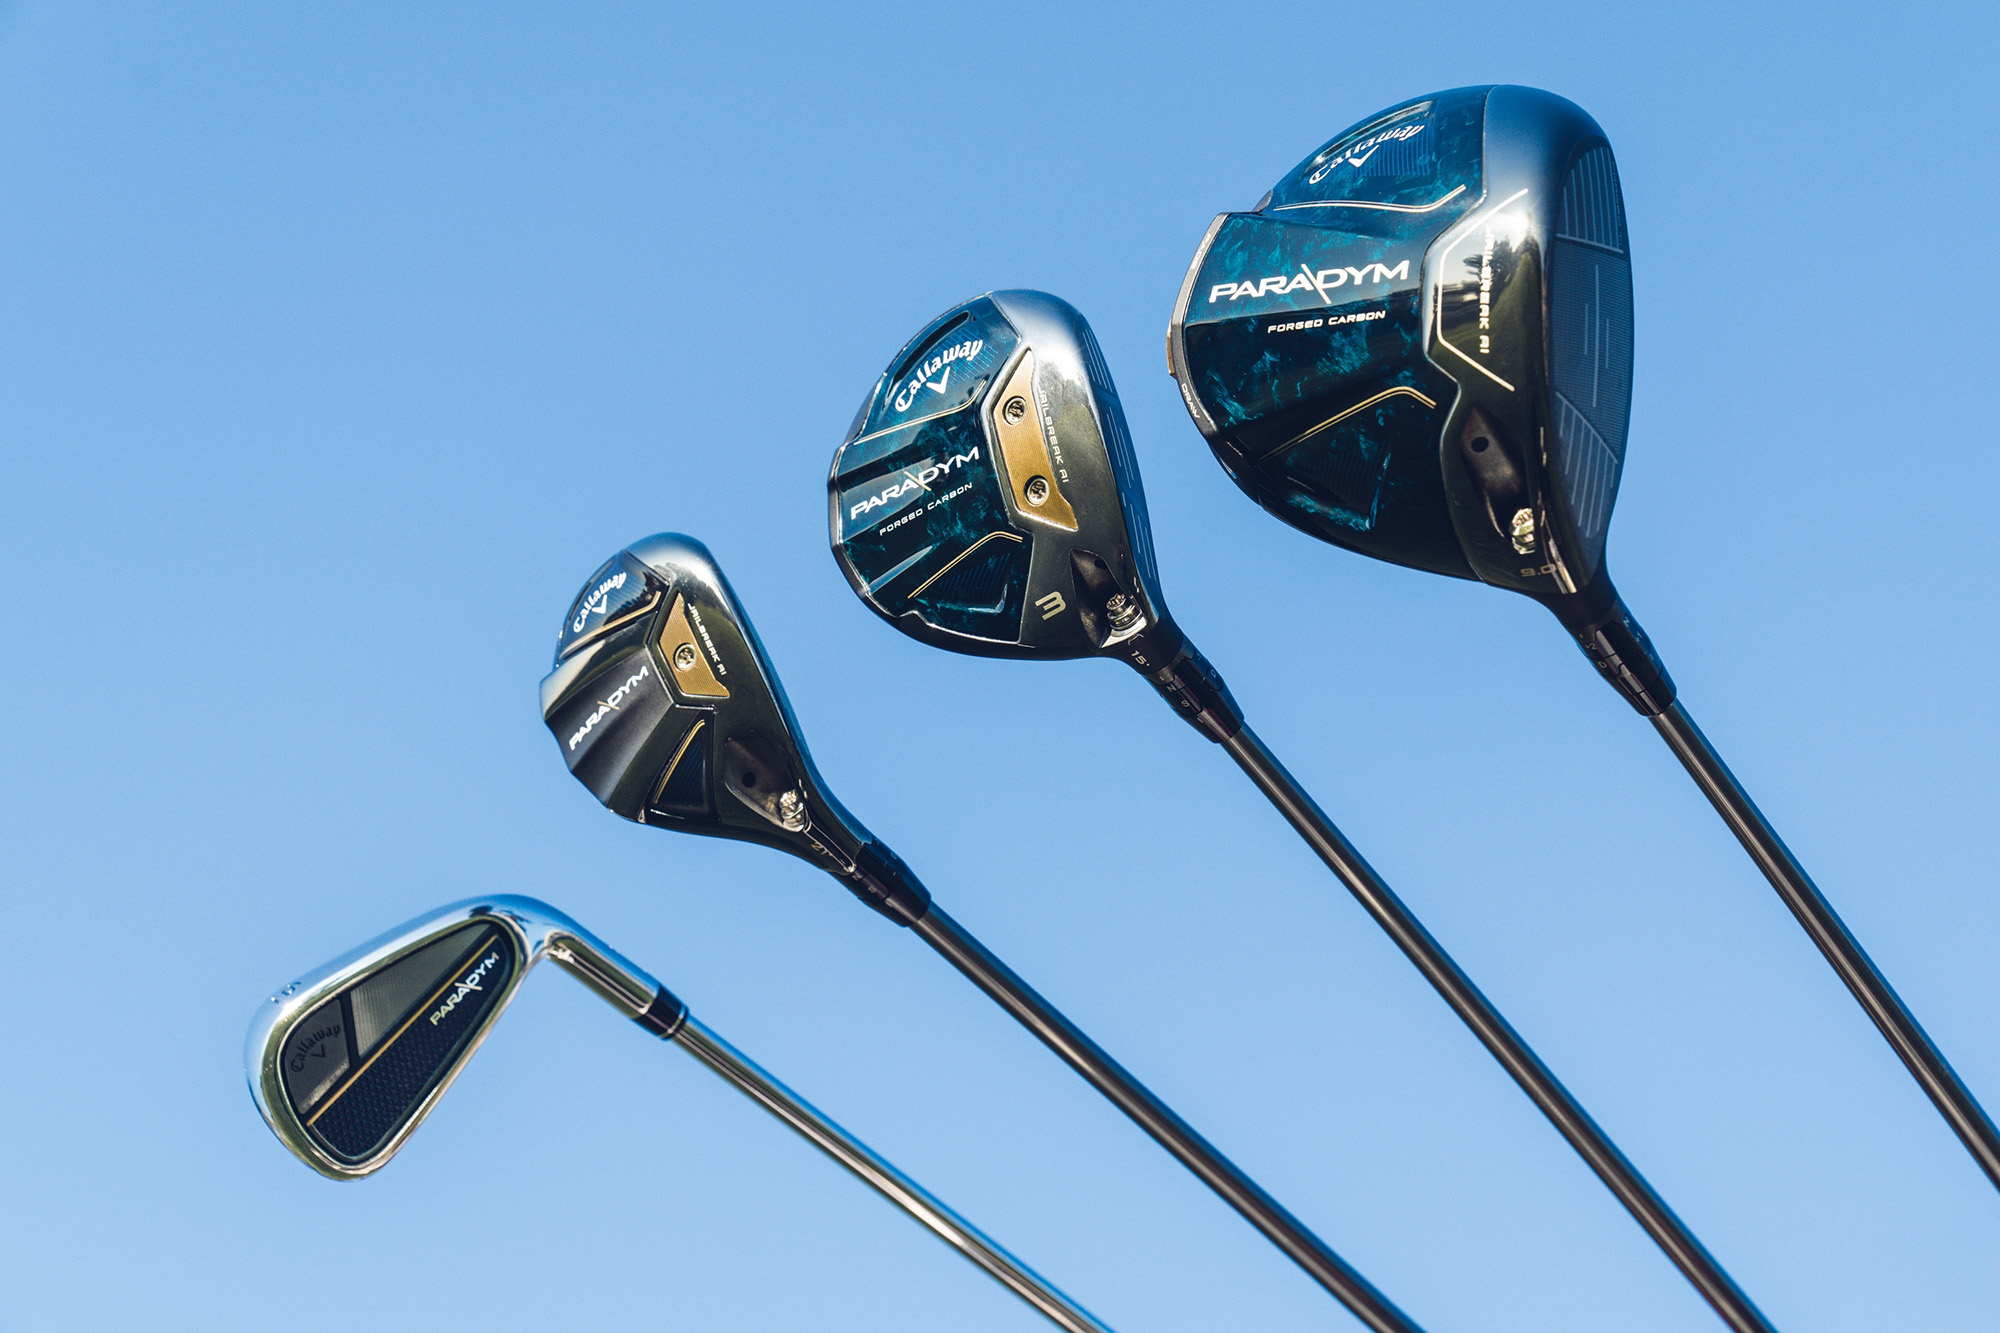 Callaway Golf Announces New Paradym Family of Woods and Irons